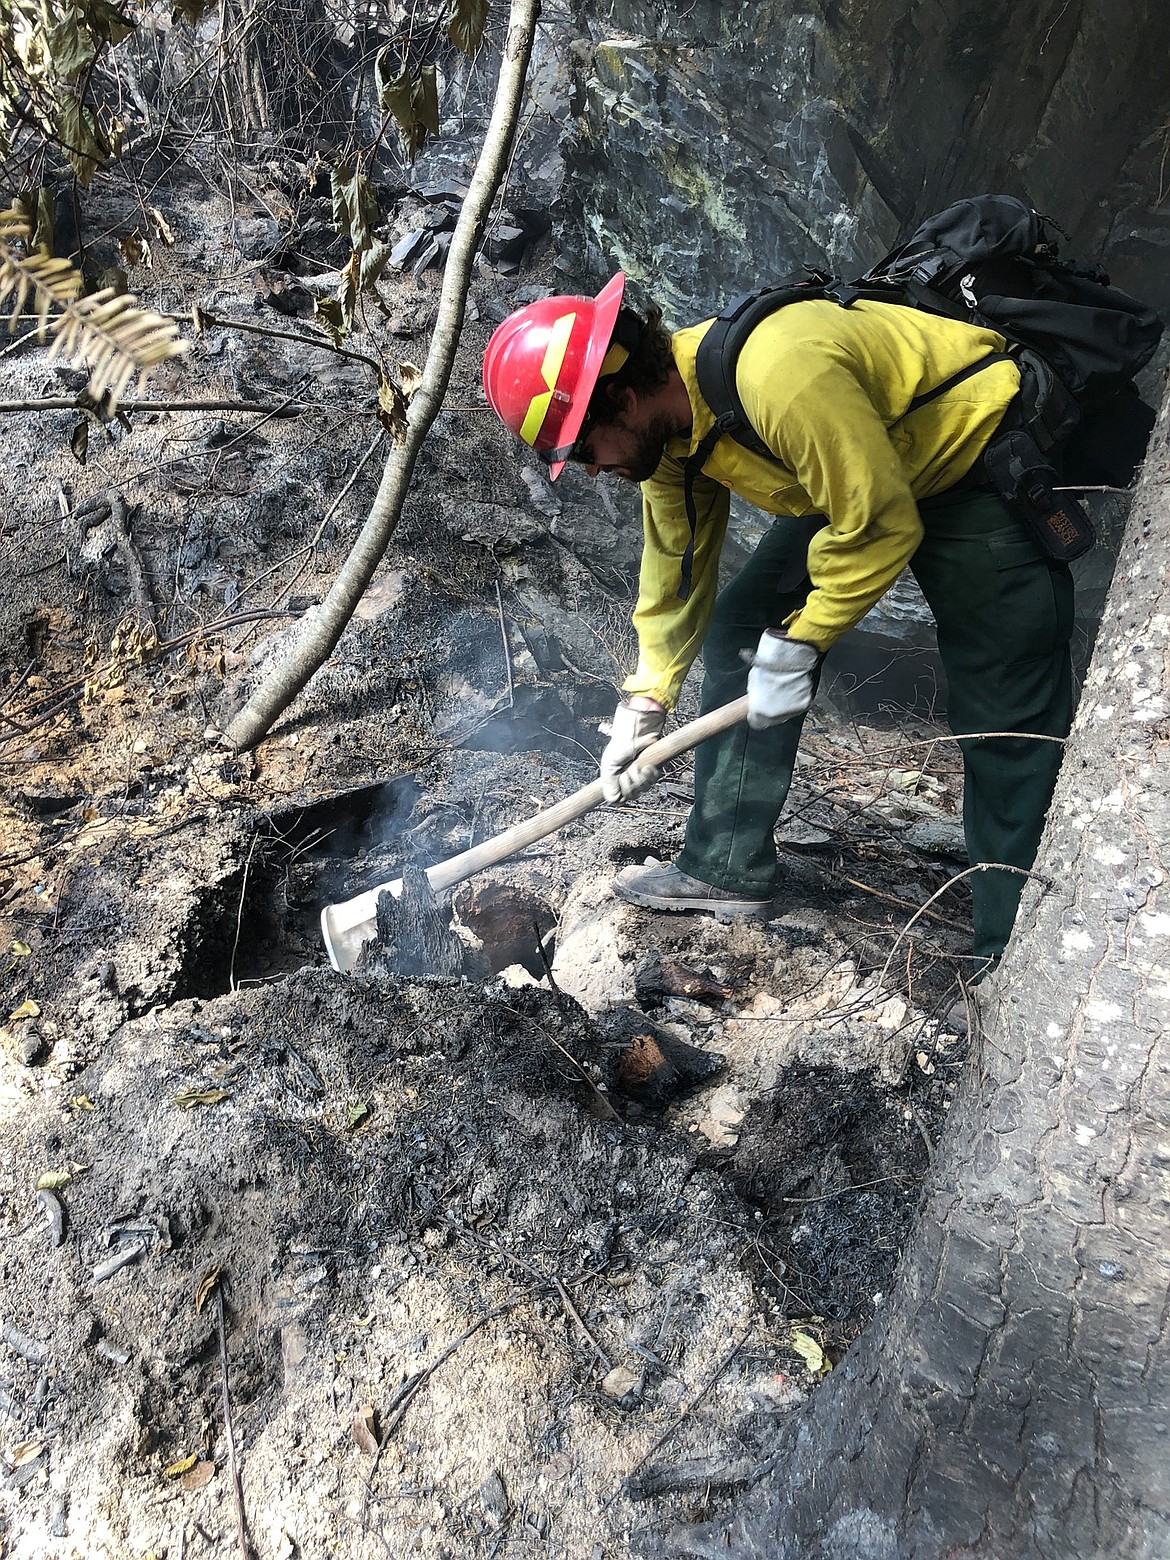 A firefighter working on the Thorne Creek Fire in Sanders County digs out hot spots so they can be extinguished. Lolo National Forest officials said Stage II restrictions would be lifted on Thursday, Aug. 26, 2021. (InciWeb)